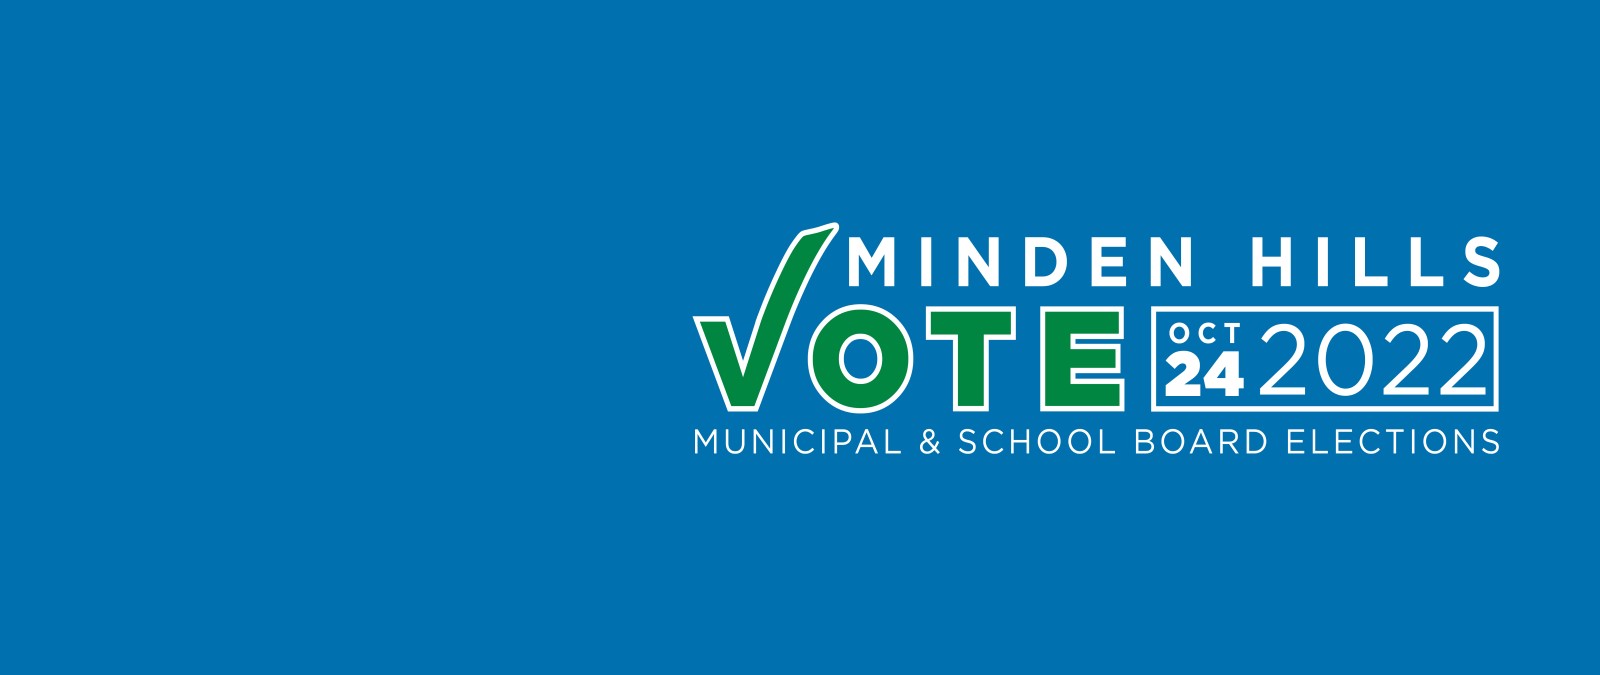 2022 Minden Hills Municipal and School Board Elections